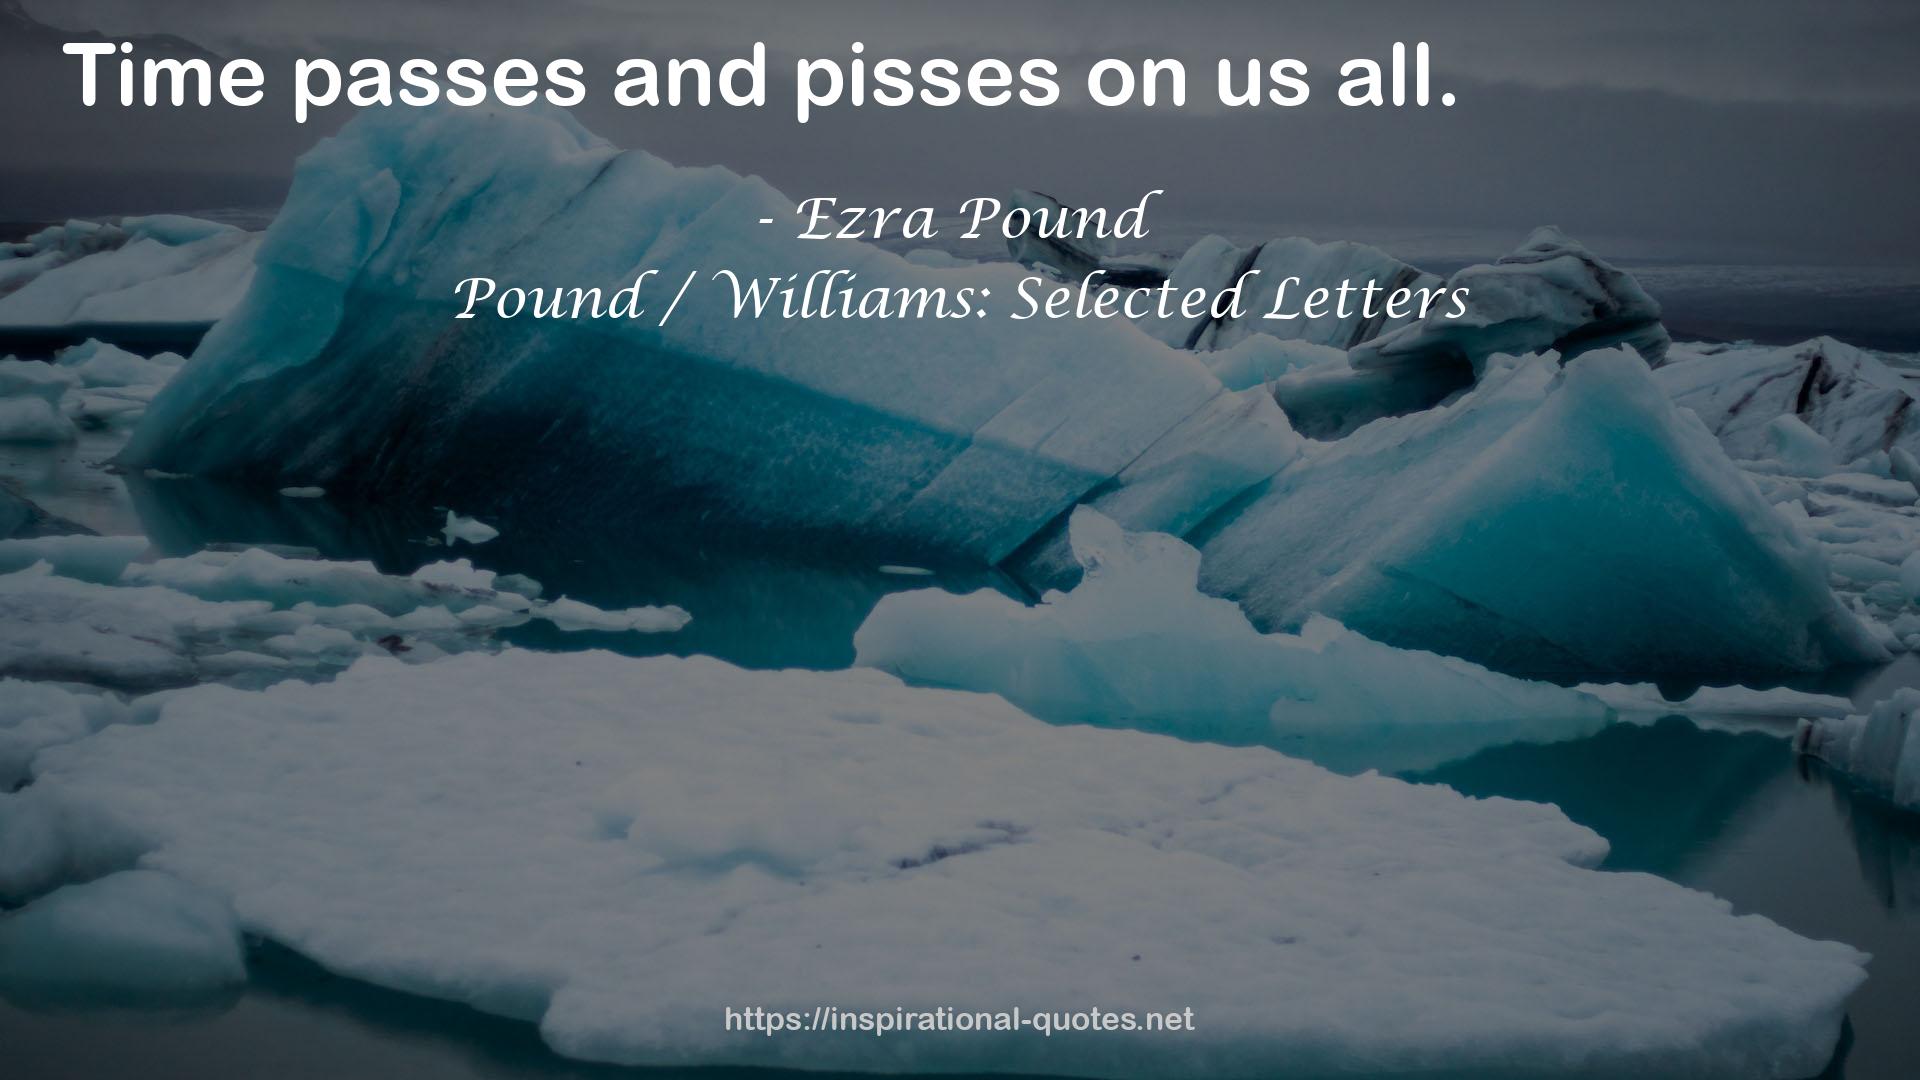 Pound / Williams: Selected Letters QUOTES